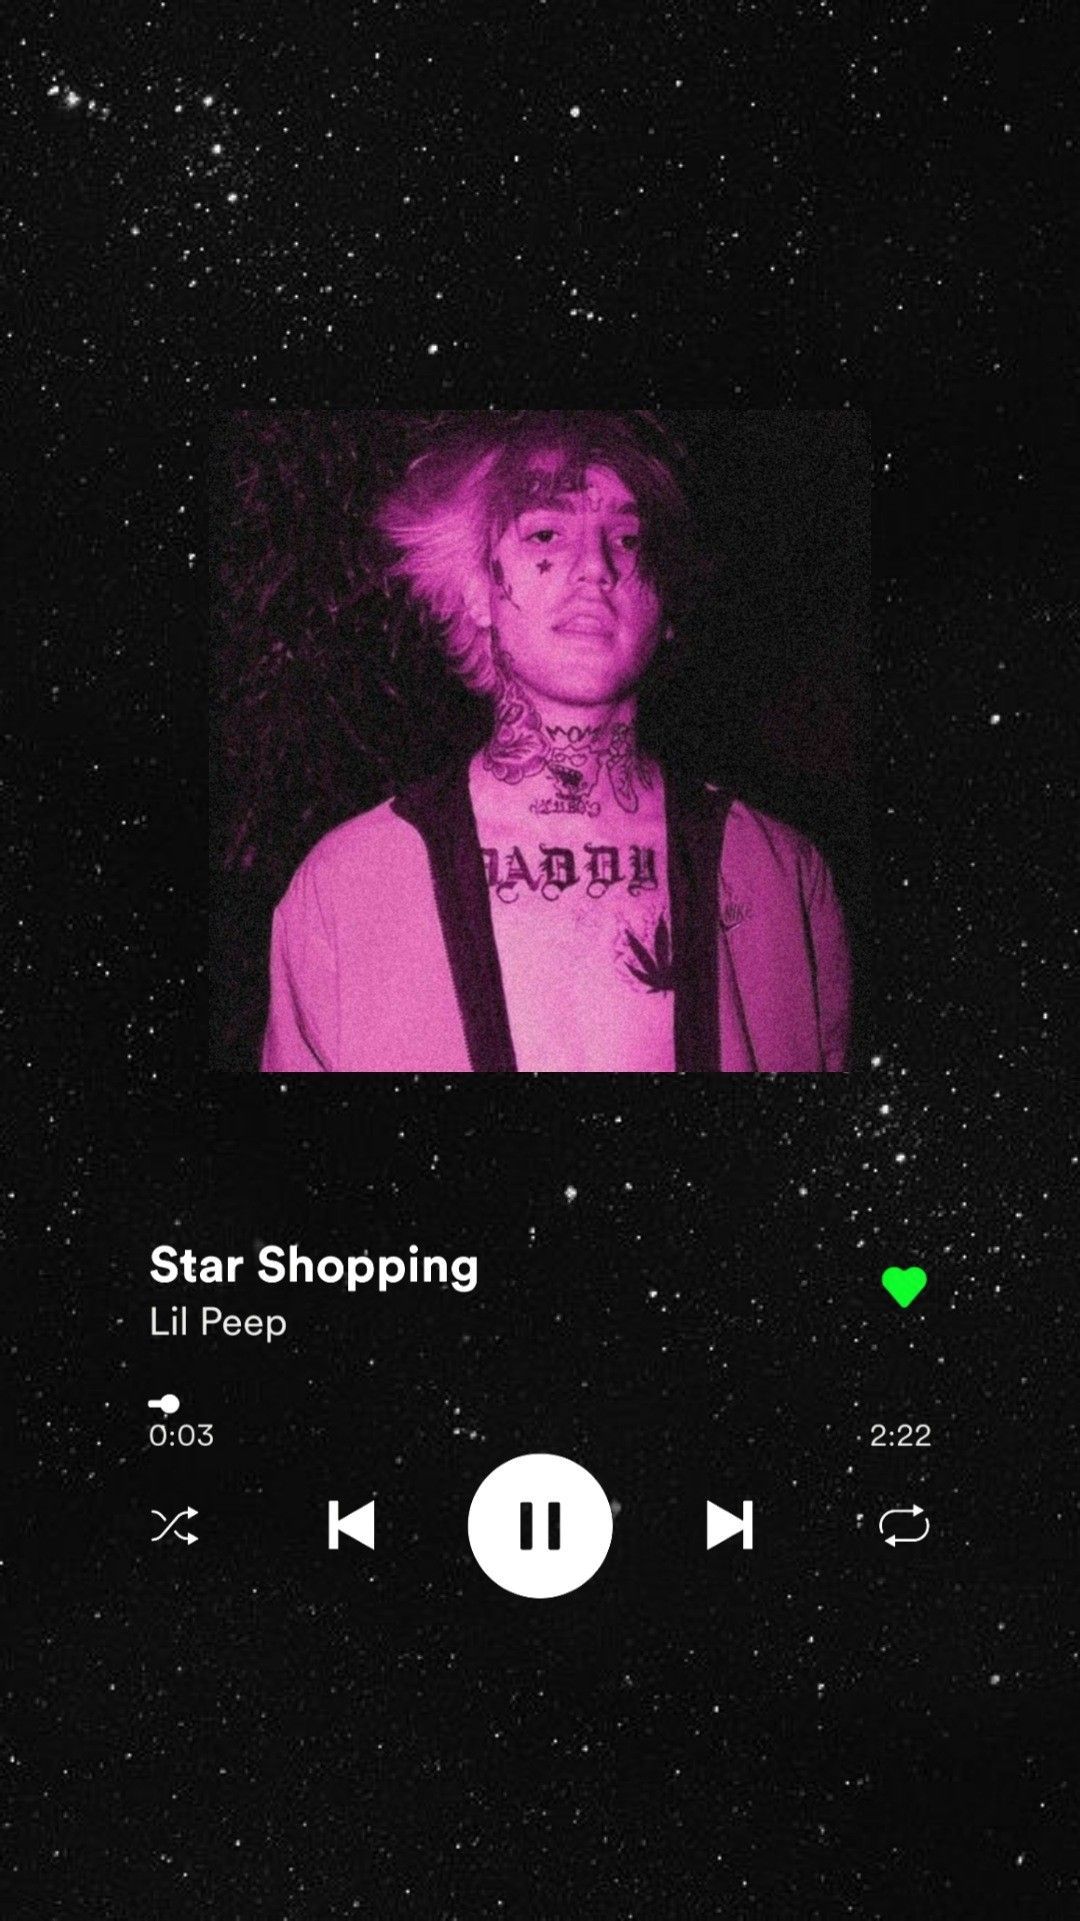 Lil peep wallpaper i made for my phone! - Lil Peep